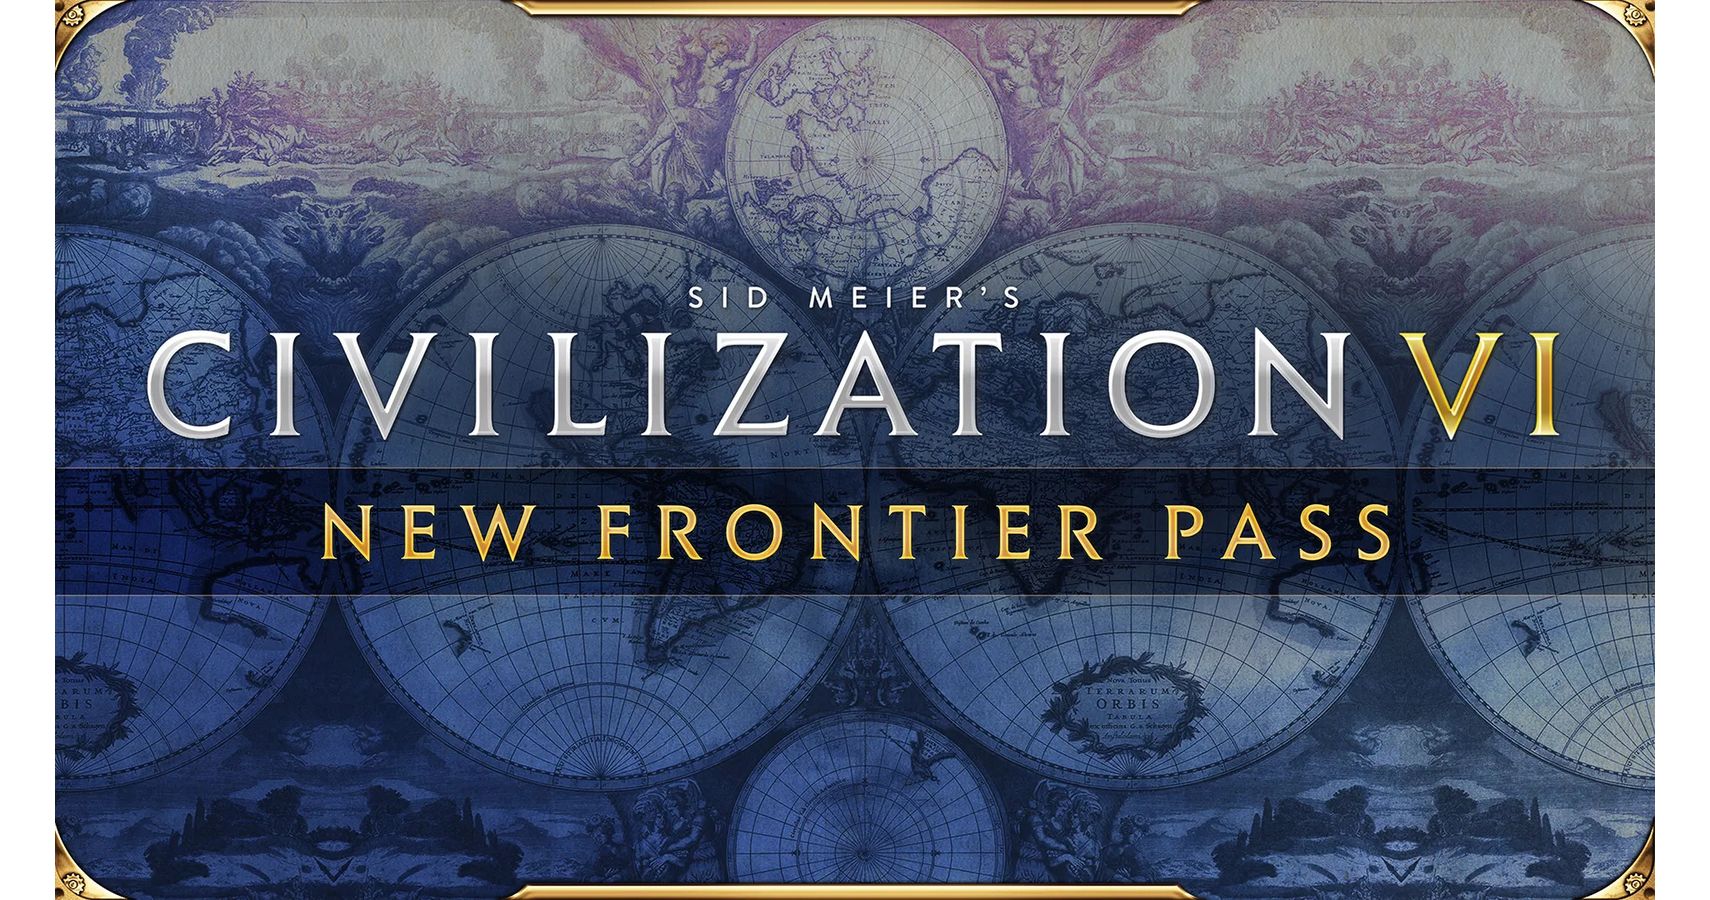 What to Expect from Civilization VIs New Frontier Pass